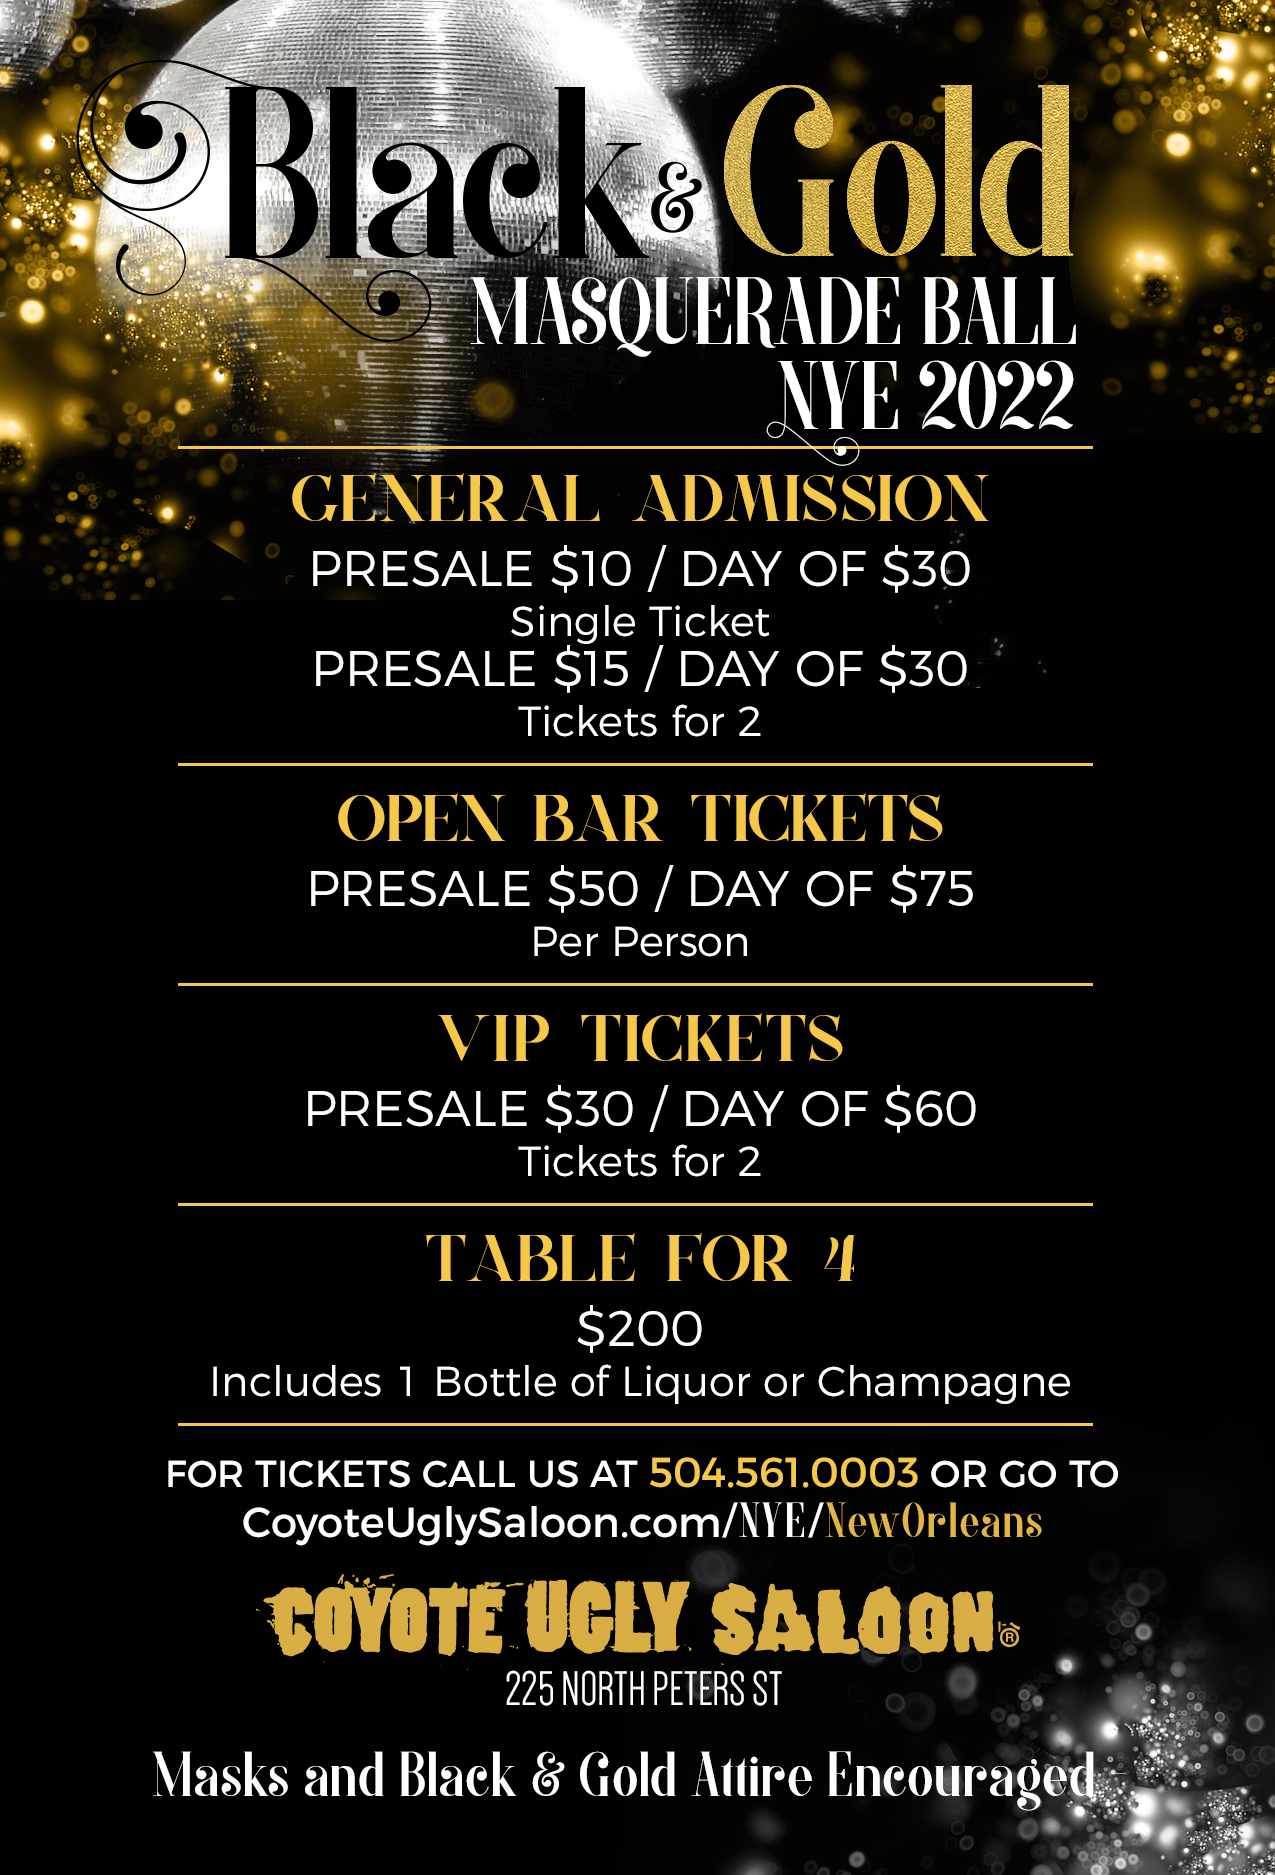 NYE 2022 – Black and Gold Masquerade Ball in New Orleans on December 31, 2022